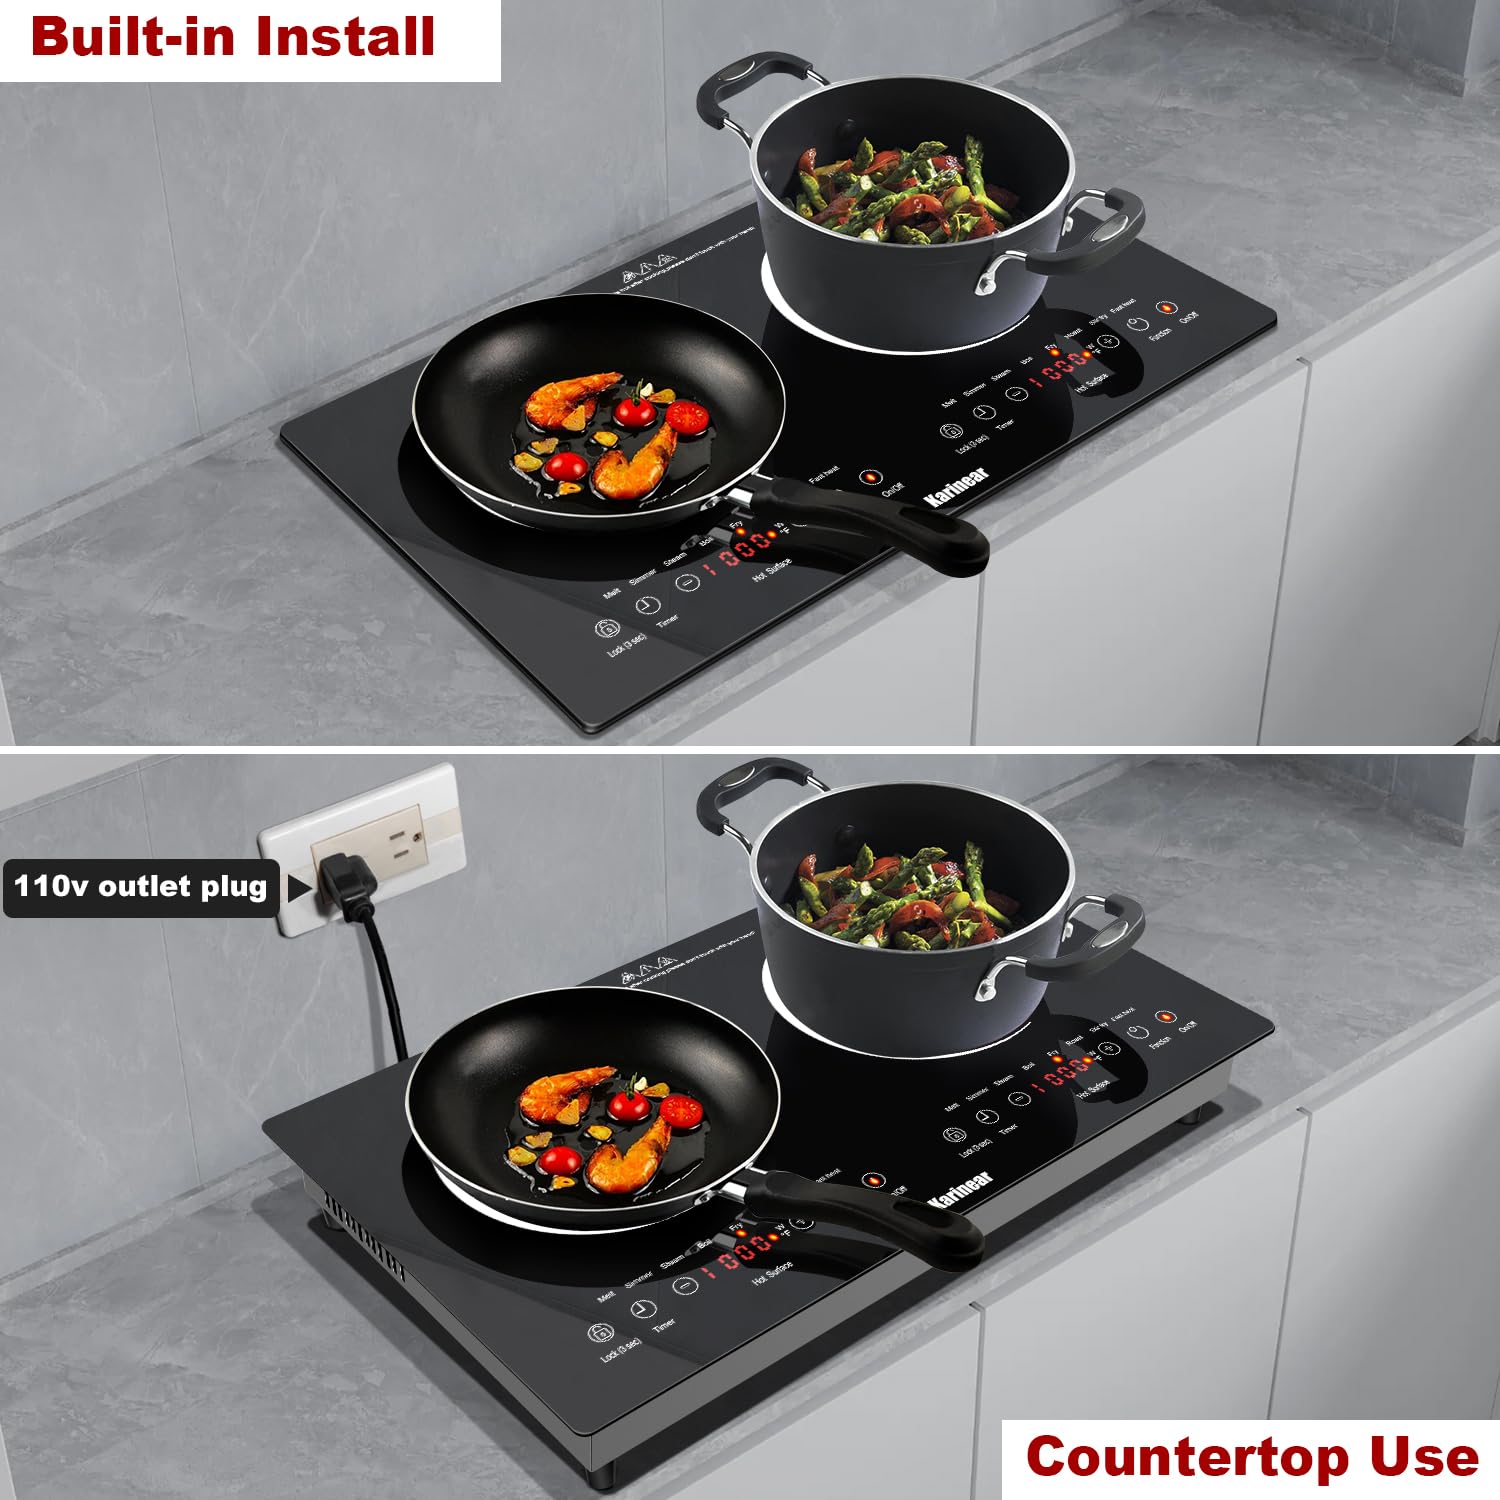 Karinear 2 Burners Electric Cooktop 24 Inch, 110v~120v Countertop and Built-in Elecric Stove Top, Portable Electric Radiant with Outlet Plug, Sensor Touch, Child Safety Lock, Timer